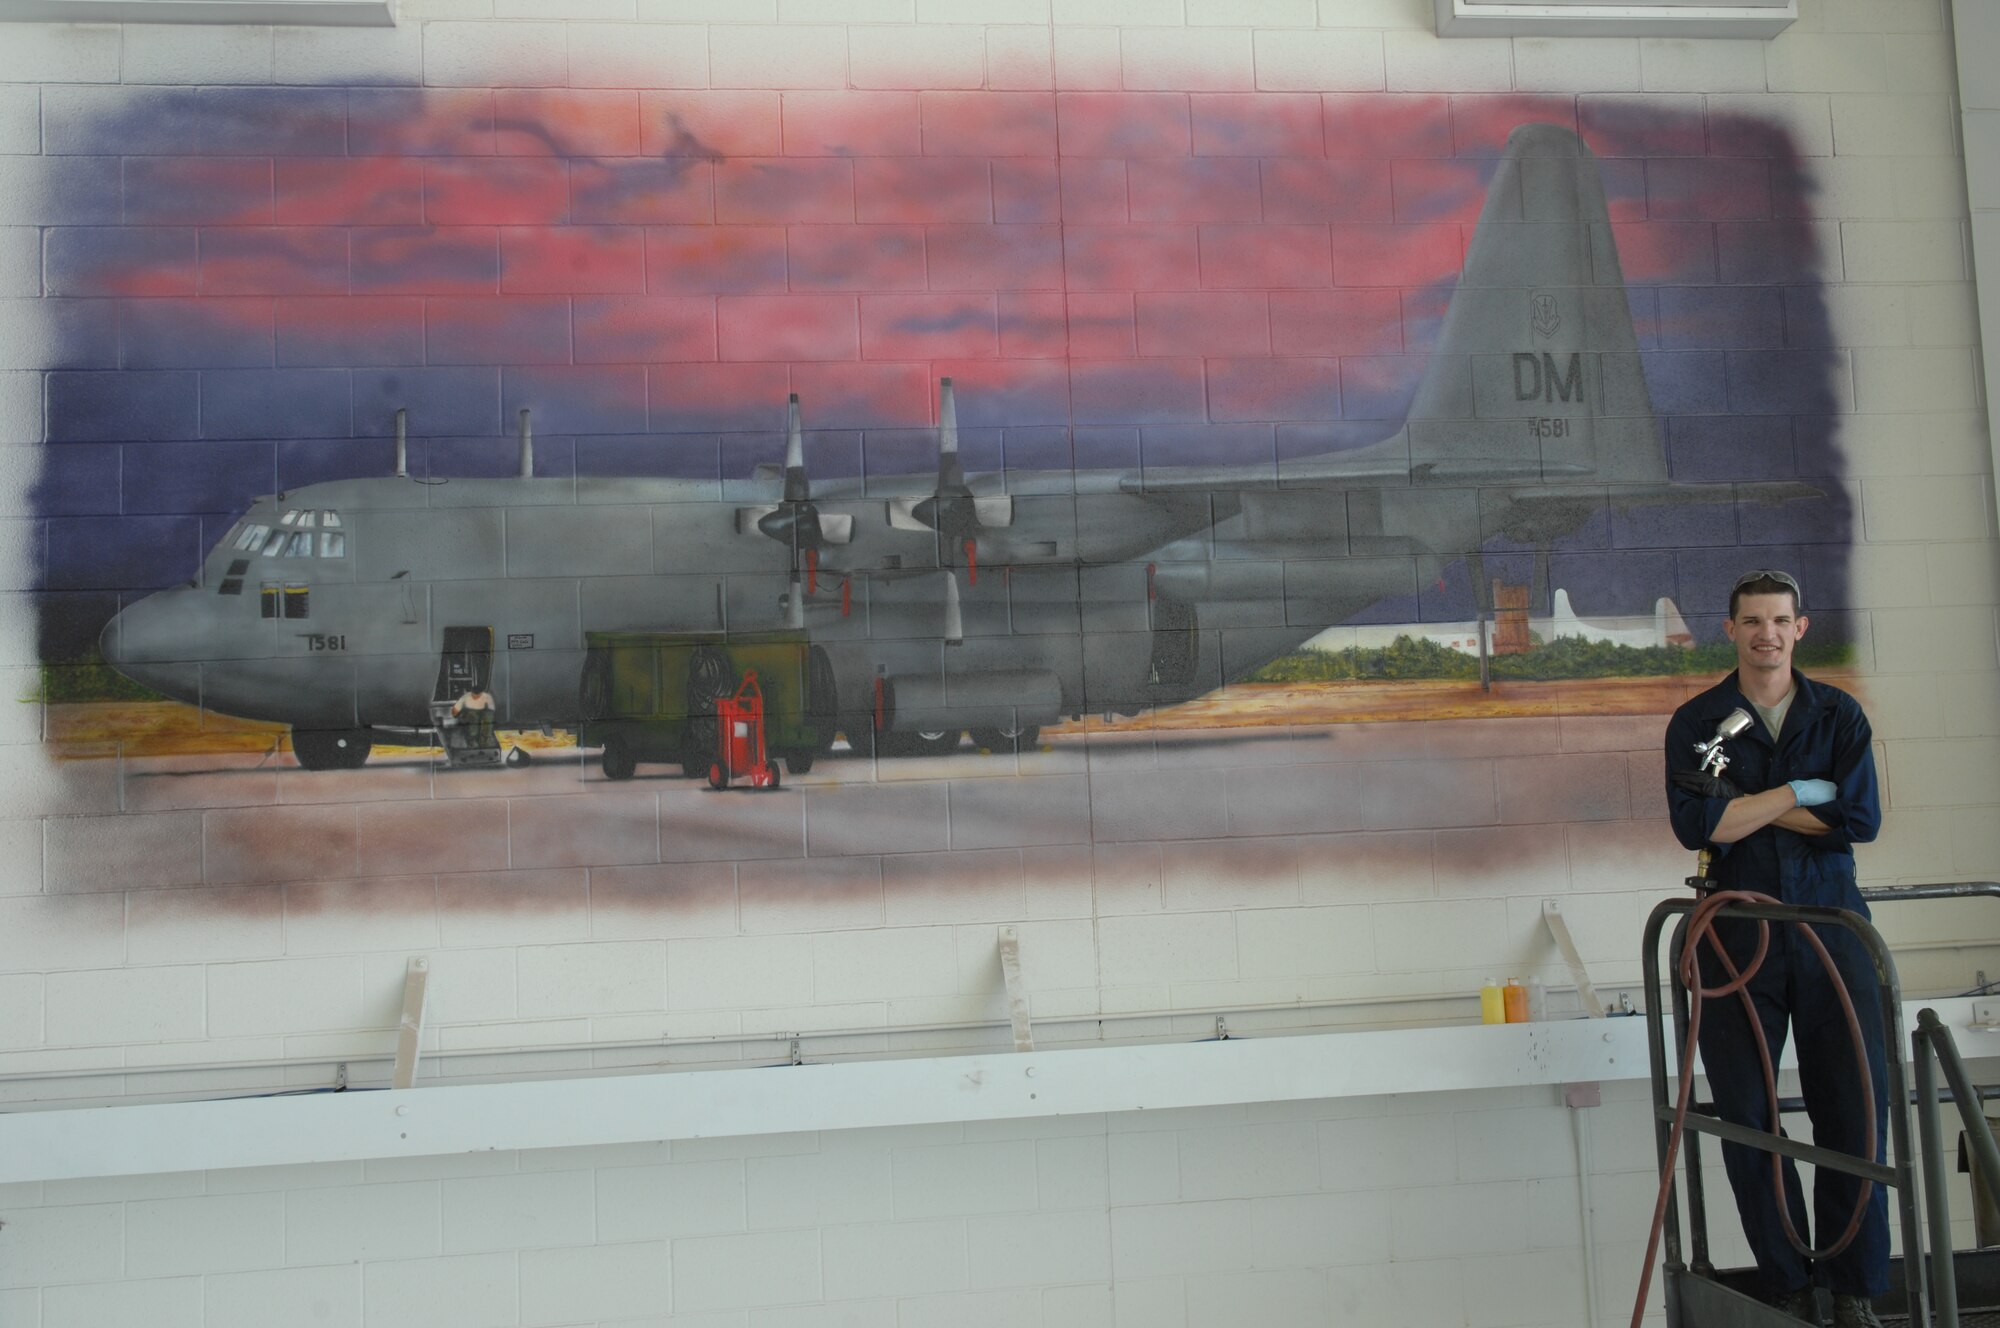 Senior Airman Patrick Corcoran, 755th Aircraft Maintenance Squadron propulsion technician, stands in front of a mural he airbrushed at Davis-Monthan Air Force Base, Ariz., Oct. 17, 2013. The mural took him about six weeks to complete and is the second of five murals be painted in the 755th AMXS hanger. (U.S. Air Force photo by Airman 1st Class Betty R. Chevalier/released)